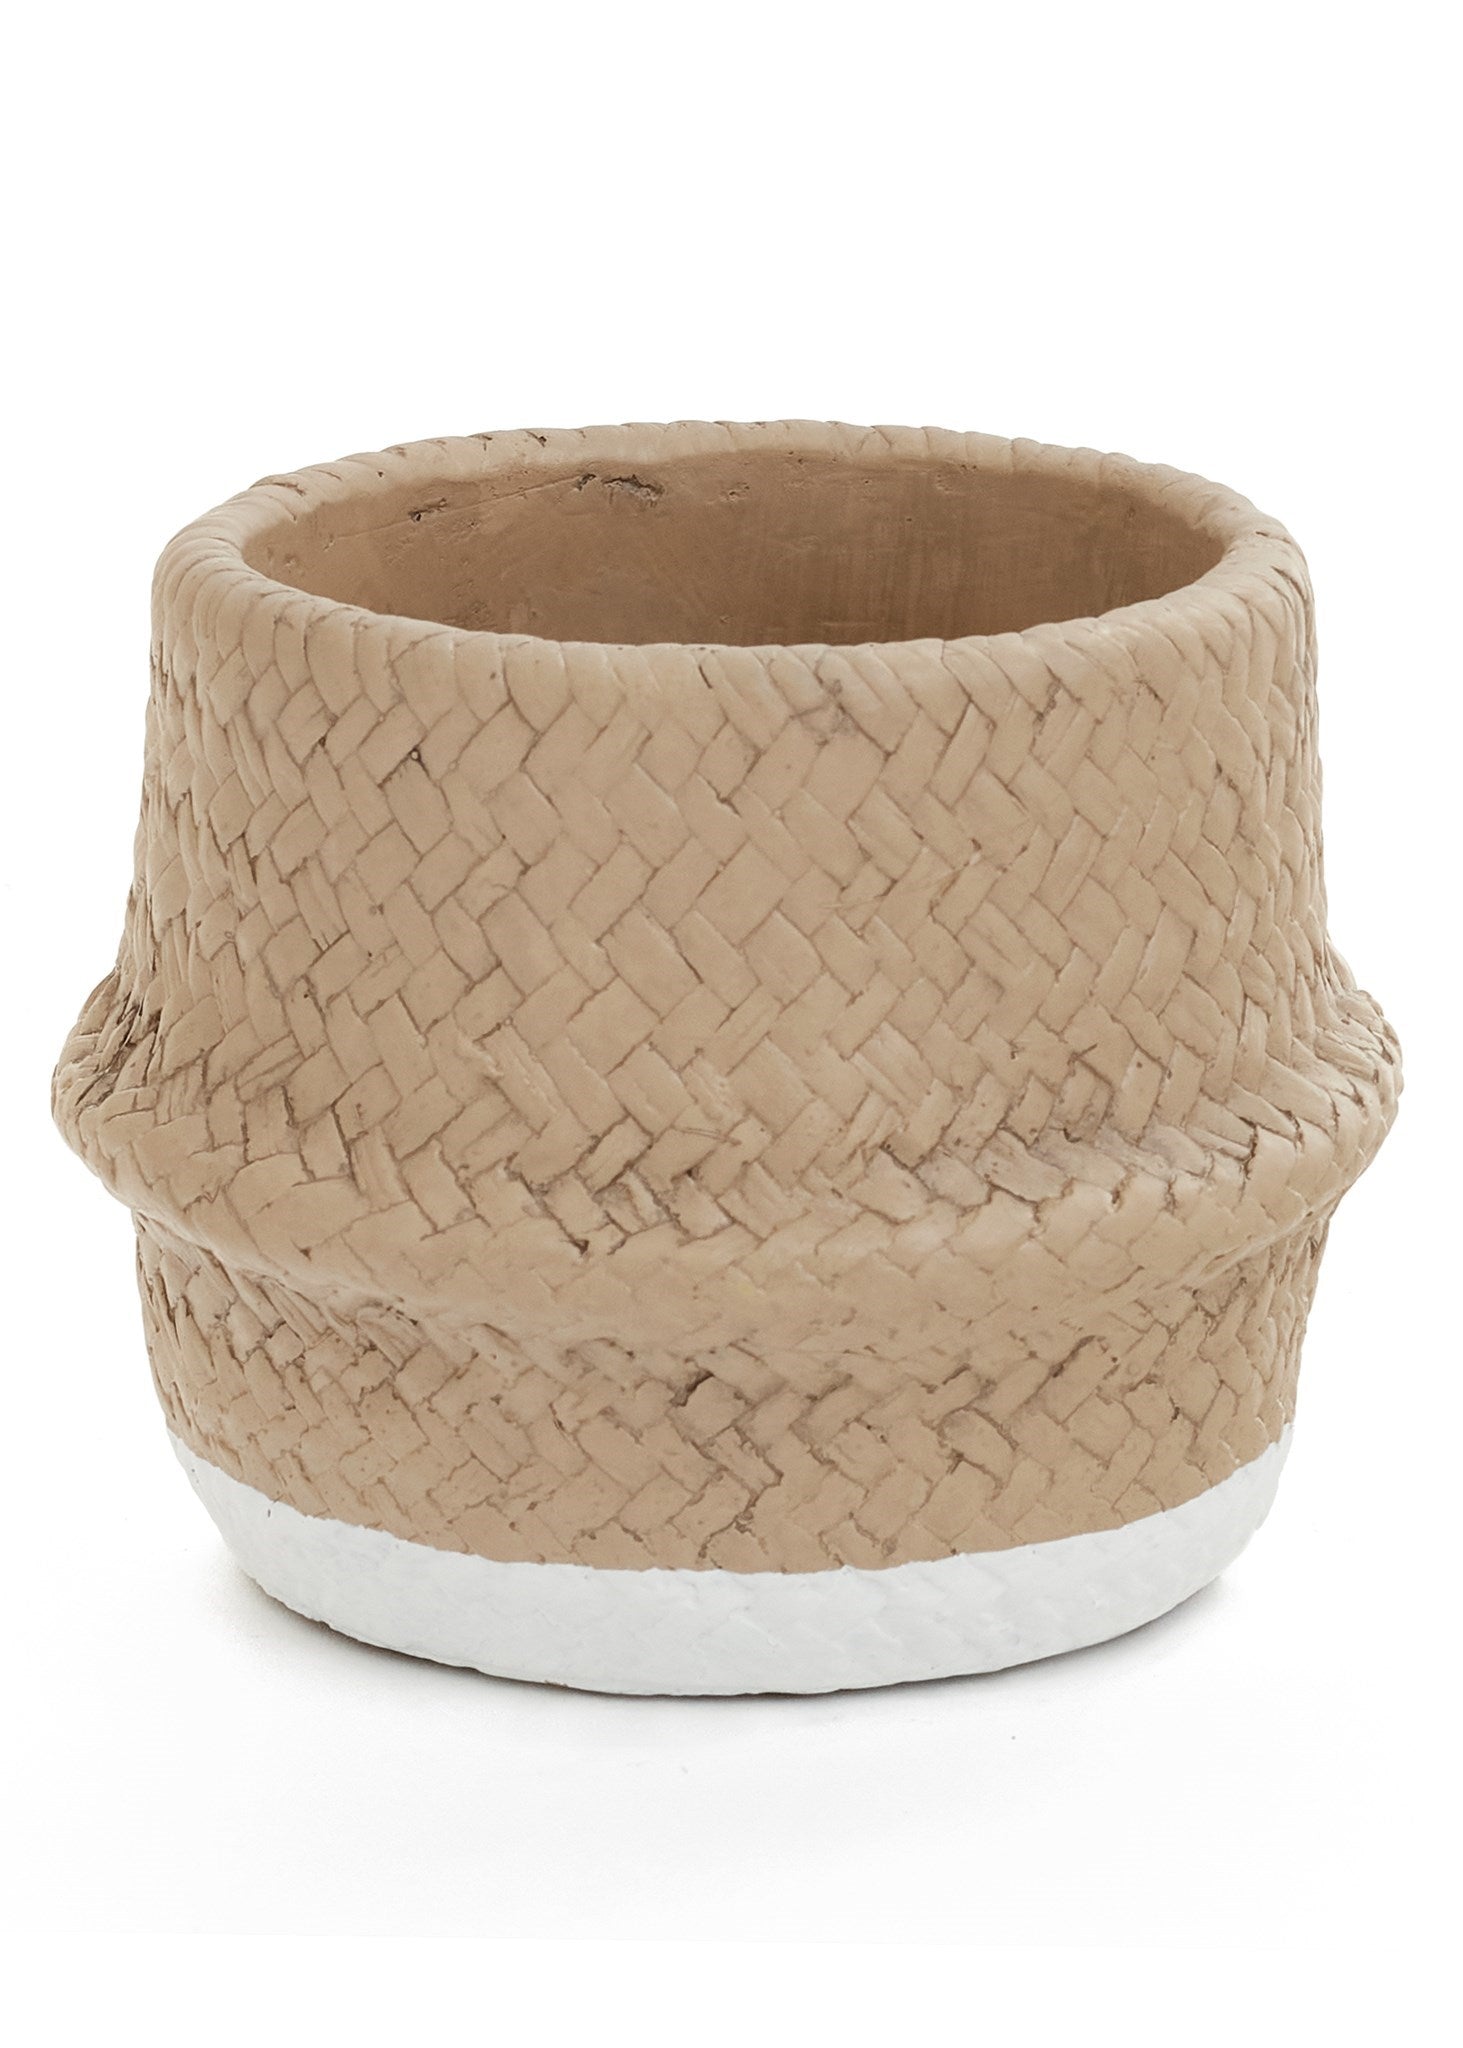 beige and white cement planter that looks woven like a basket